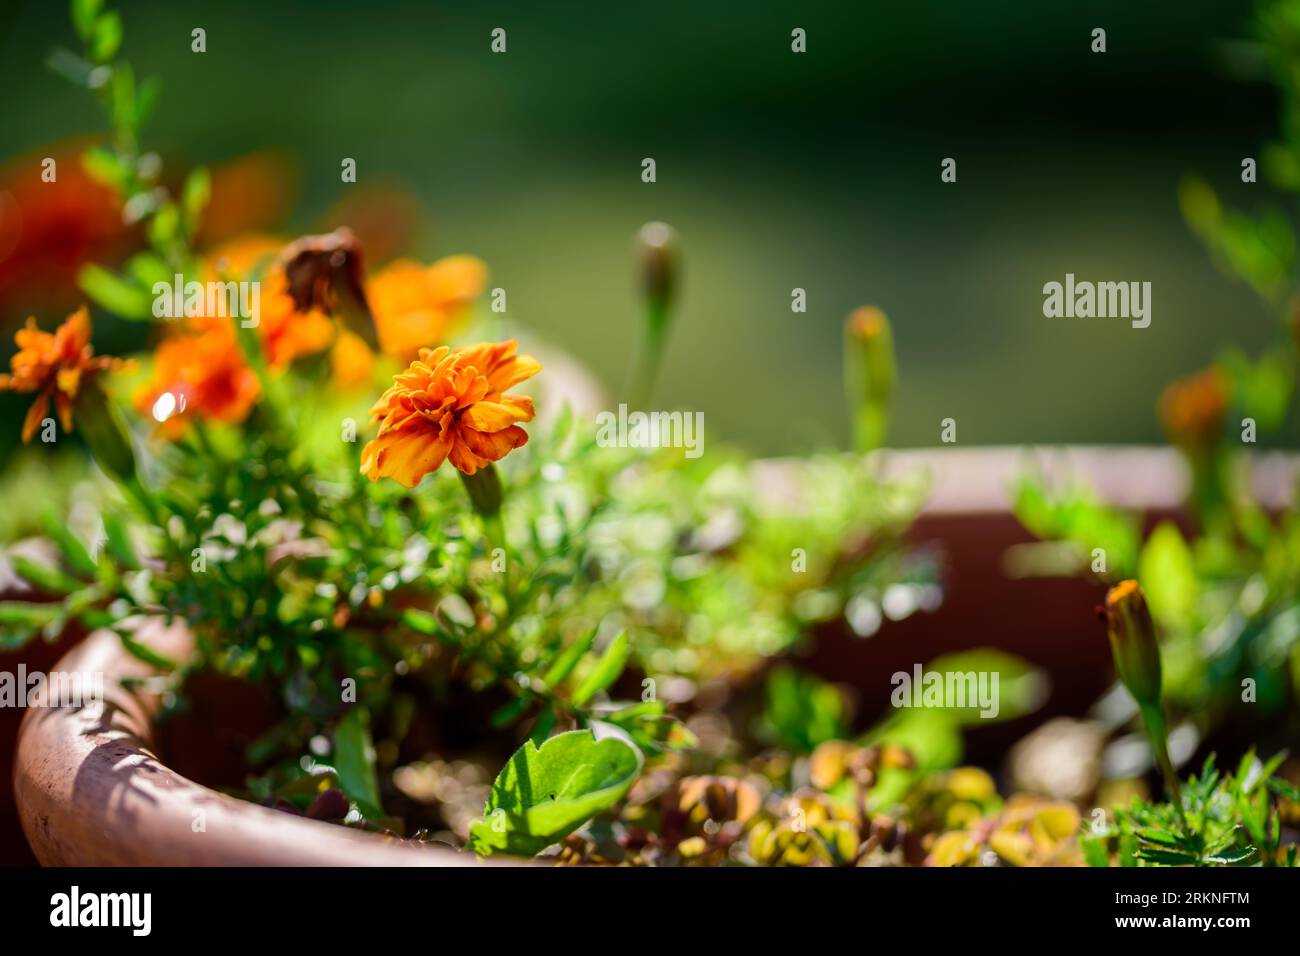 Tagetes patula flowers in brown pot in garden. Stock Photo